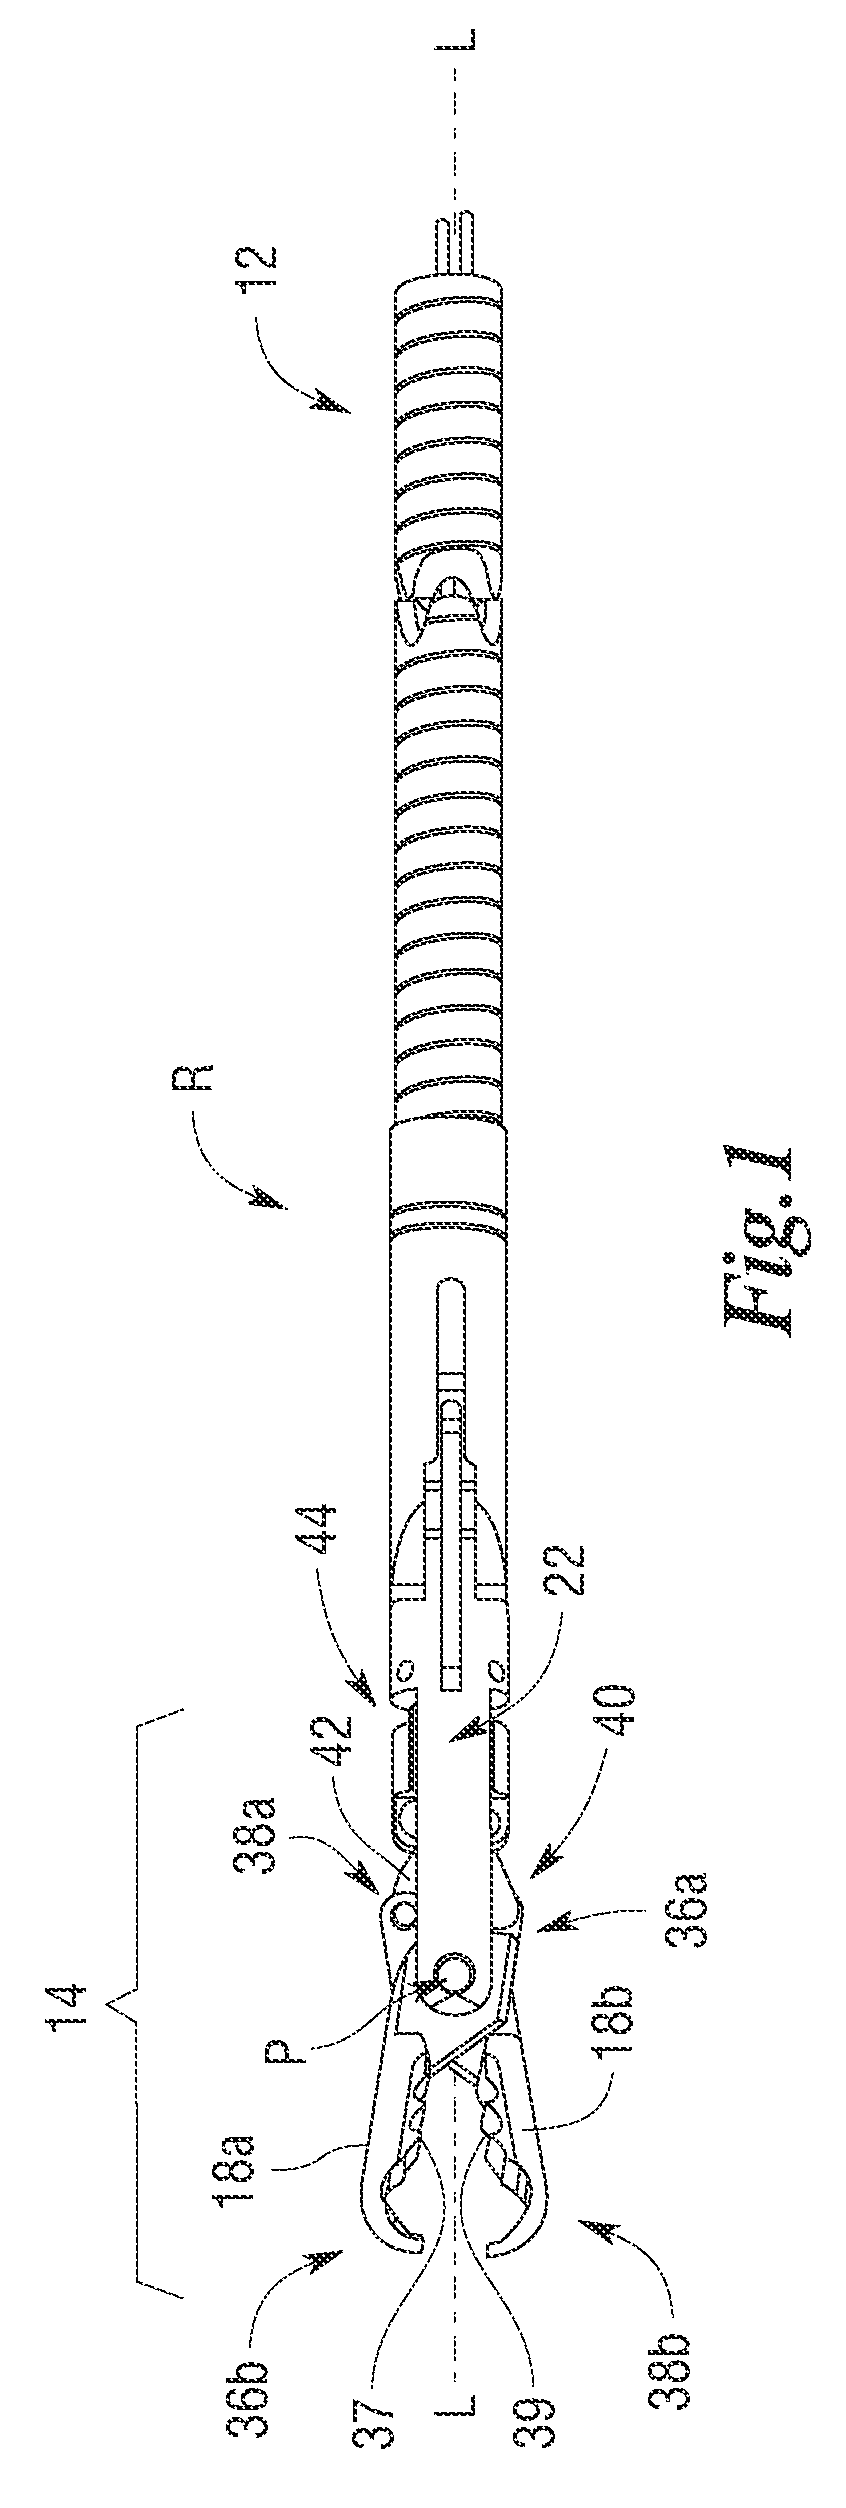 Rotational coupling device for surgical instrument with flexible actuators